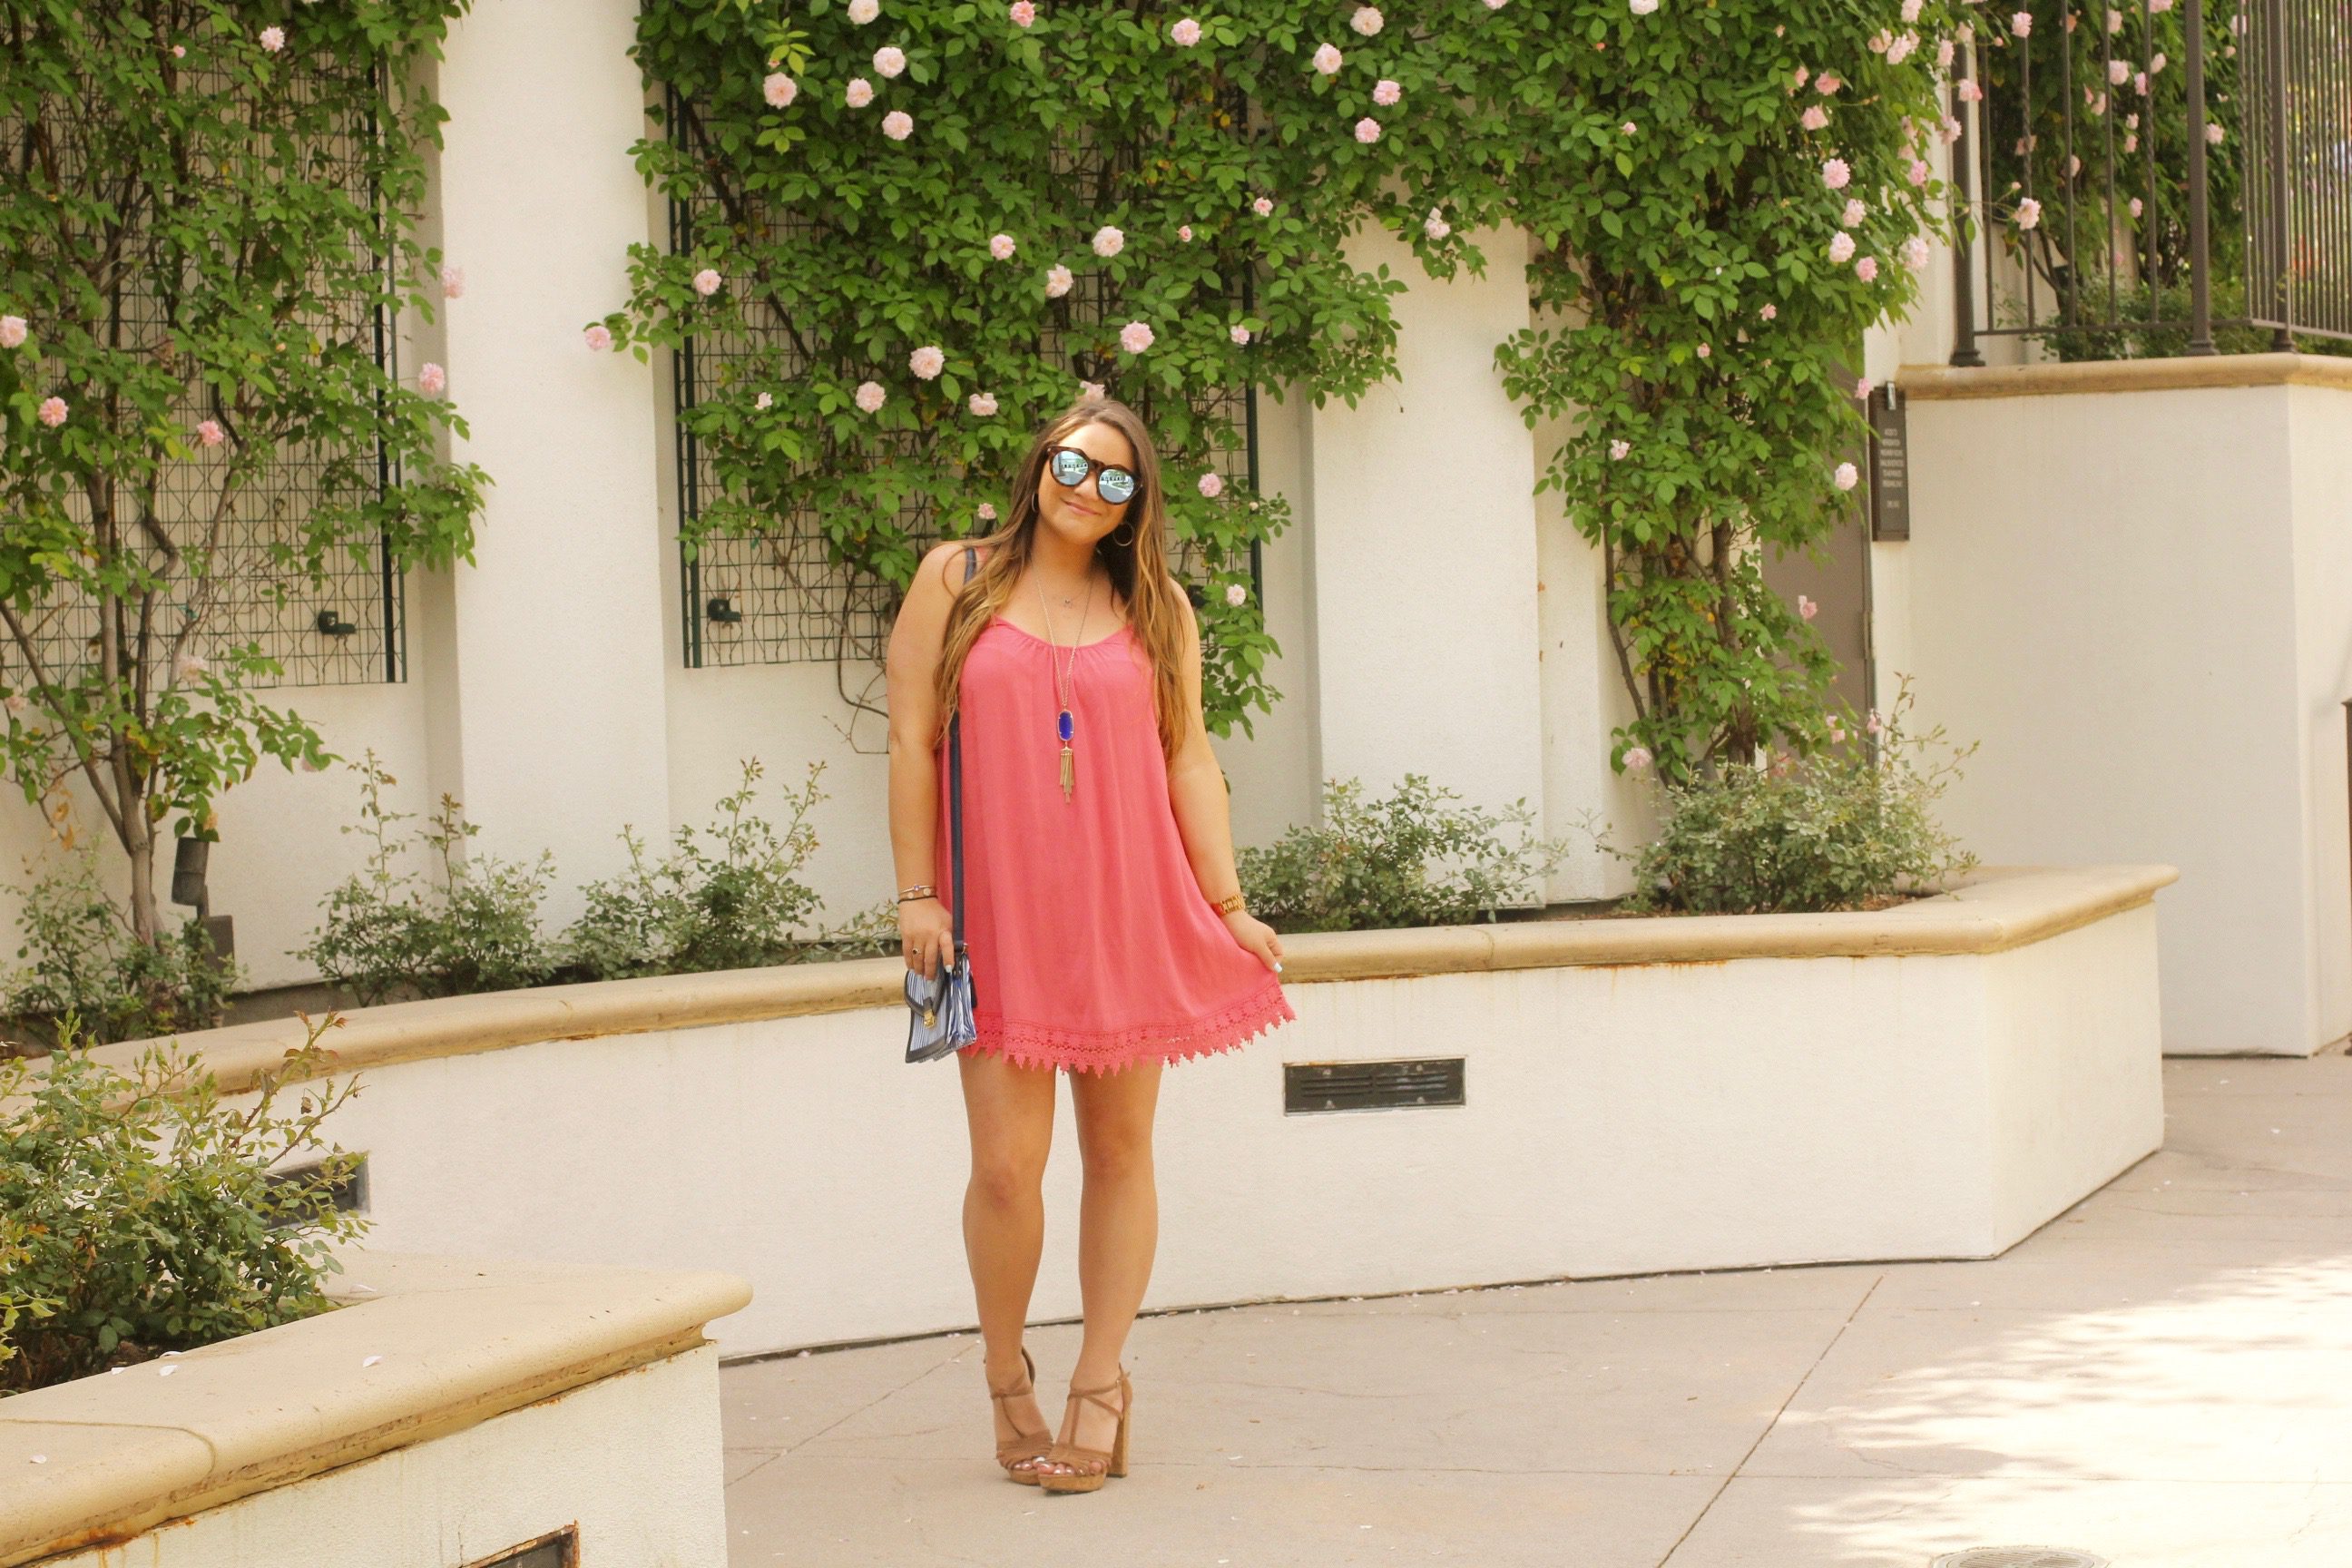 missyonmadison, melissa tierney, fashion blogger, fashion blog, summer style, summer trends, forever 21, nordstrom rack, cork heels, brown suede heels, kendra scott necklace, kendra scott rayne necklace, le specs sunglasses, coral dress, how to style coral, 